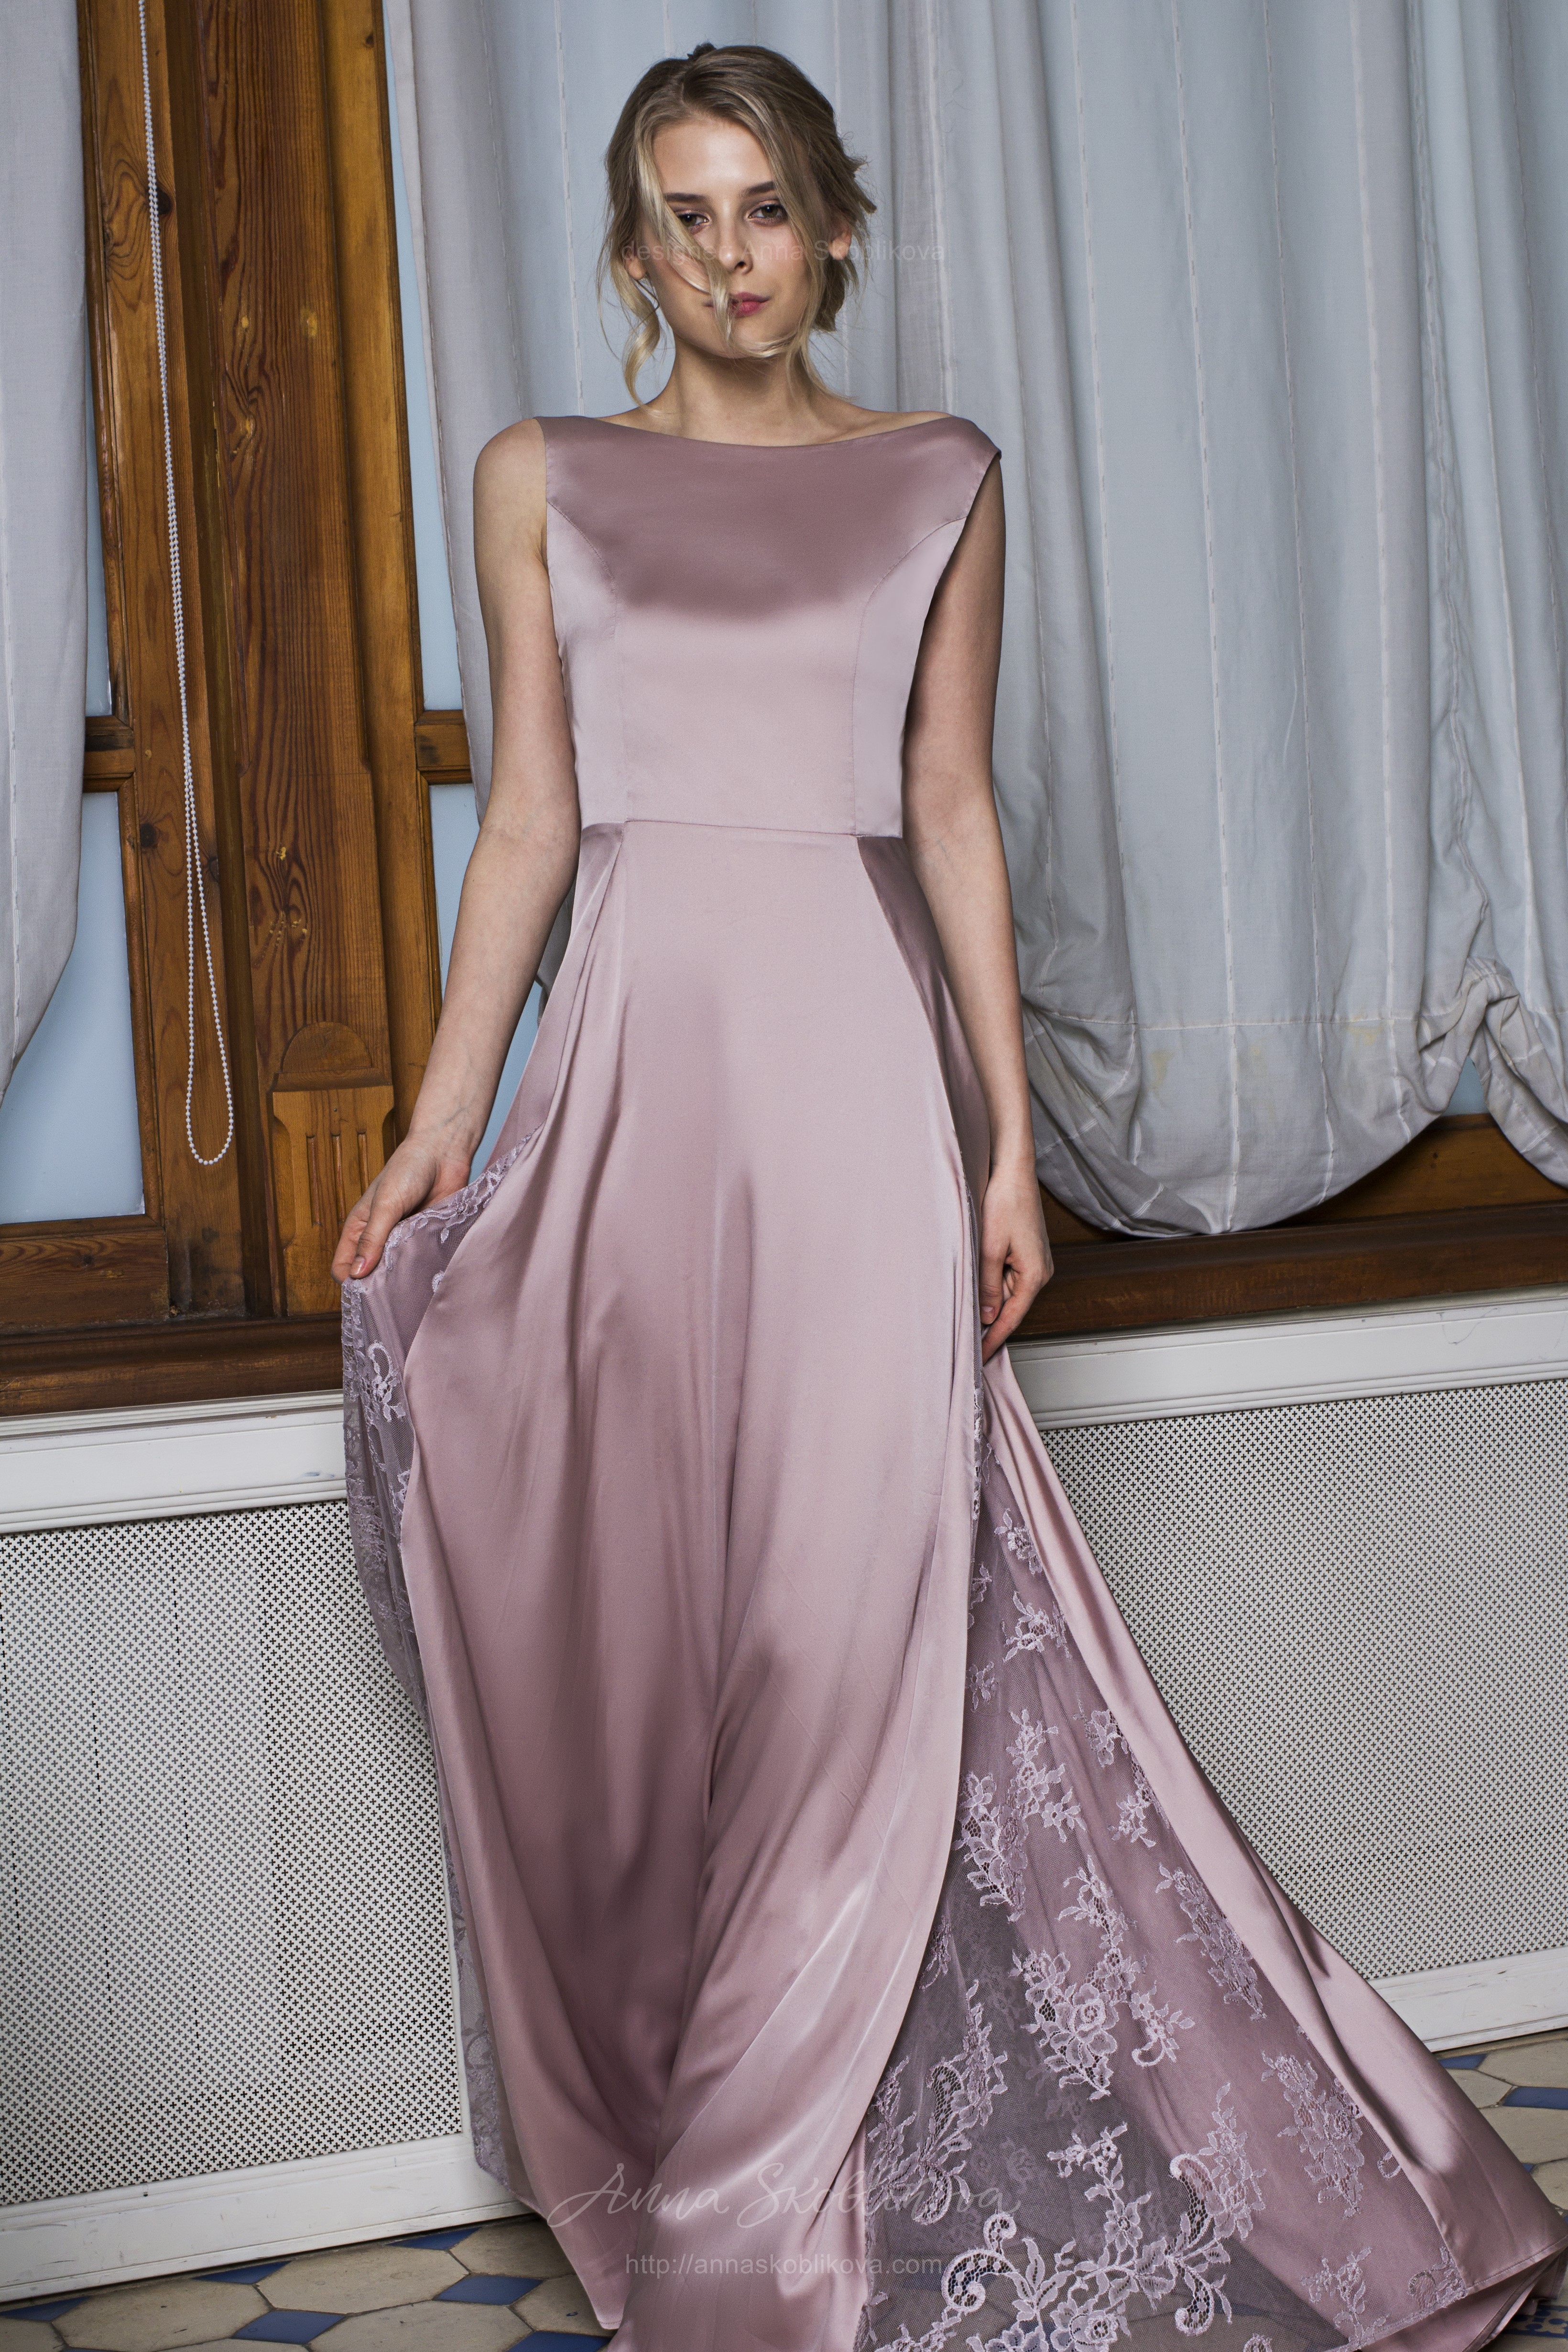 Couture Dresses - Luxury Womenswear - Naked Dresses